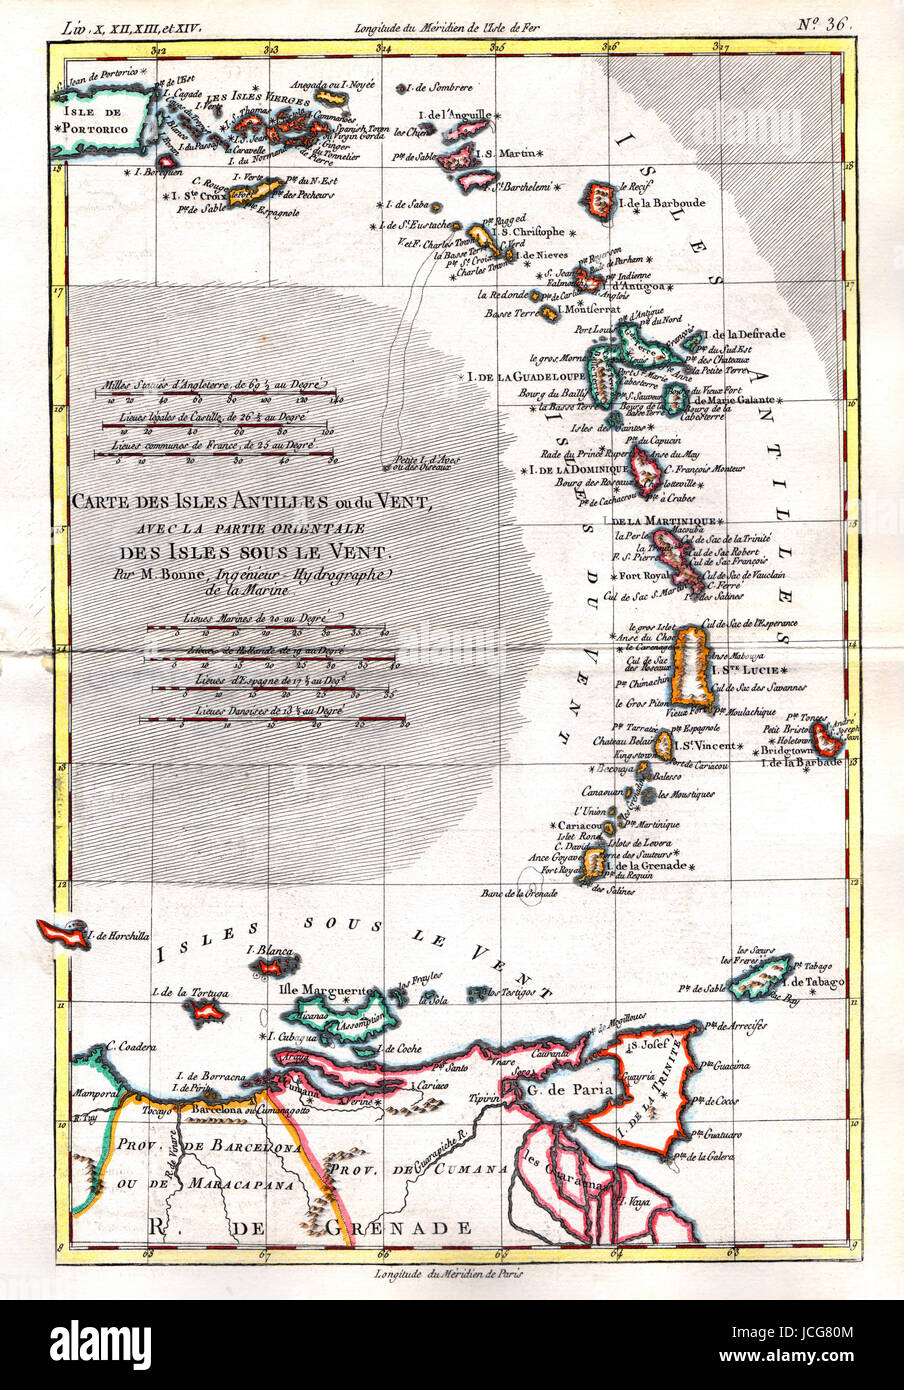 1779 Bonne Map of the Antilles Islands of the West Indies on the Leeward side of the Caribbean Sea. Stock Photo